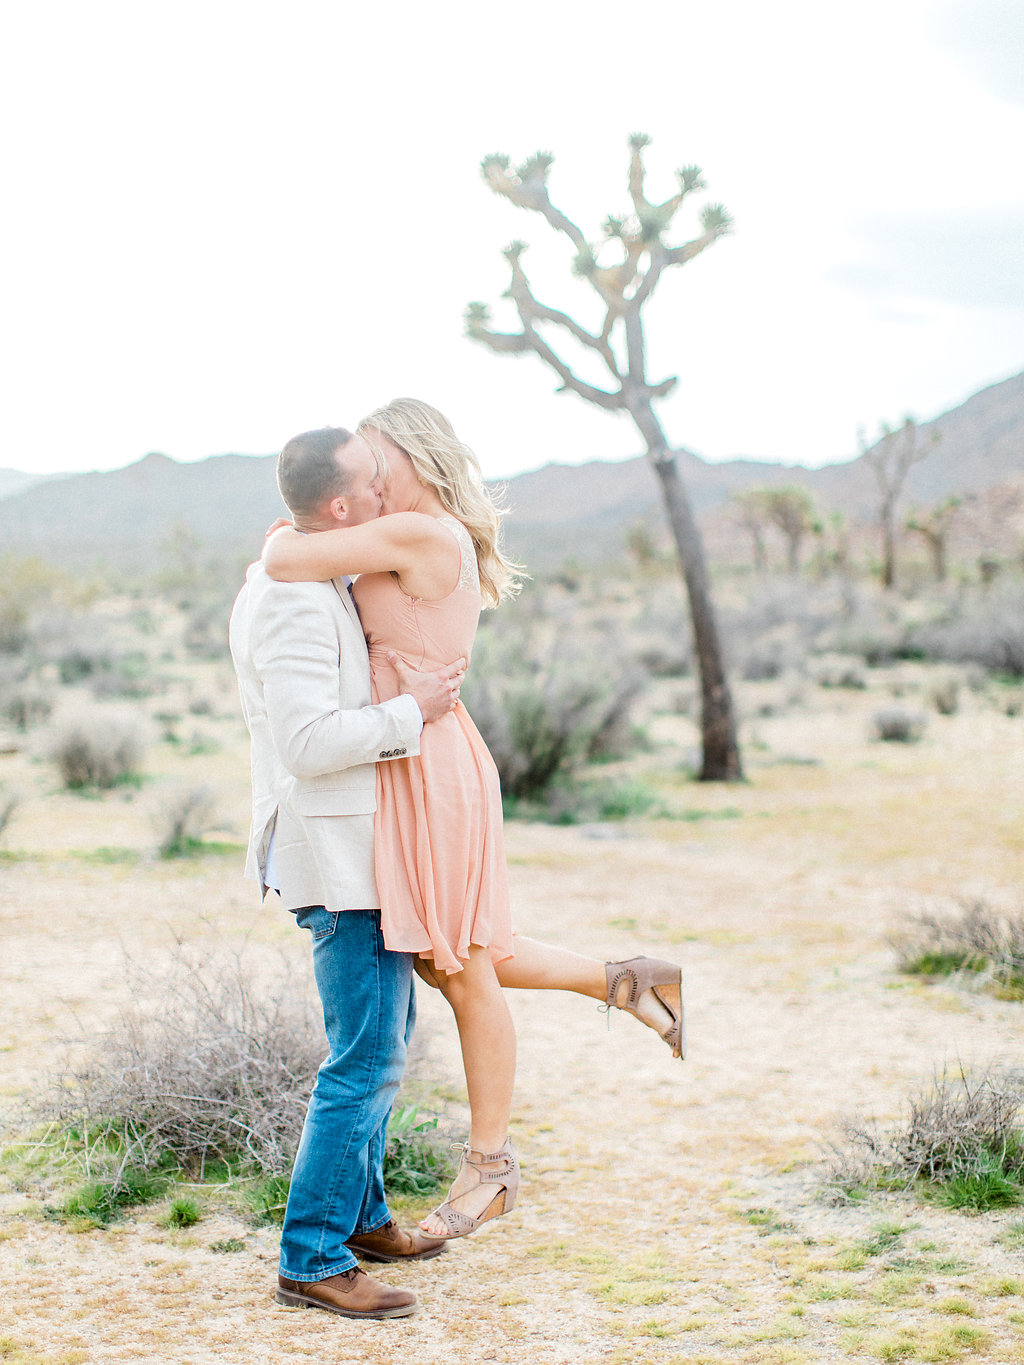 Joshua Tree Engagement Session | What to Wear for Pictures | Southern California Wedding Photographer | Mastin Labs Fuji Film | Fine Art Photographer | Desert Shoot | Dancing in the Desert.jpg